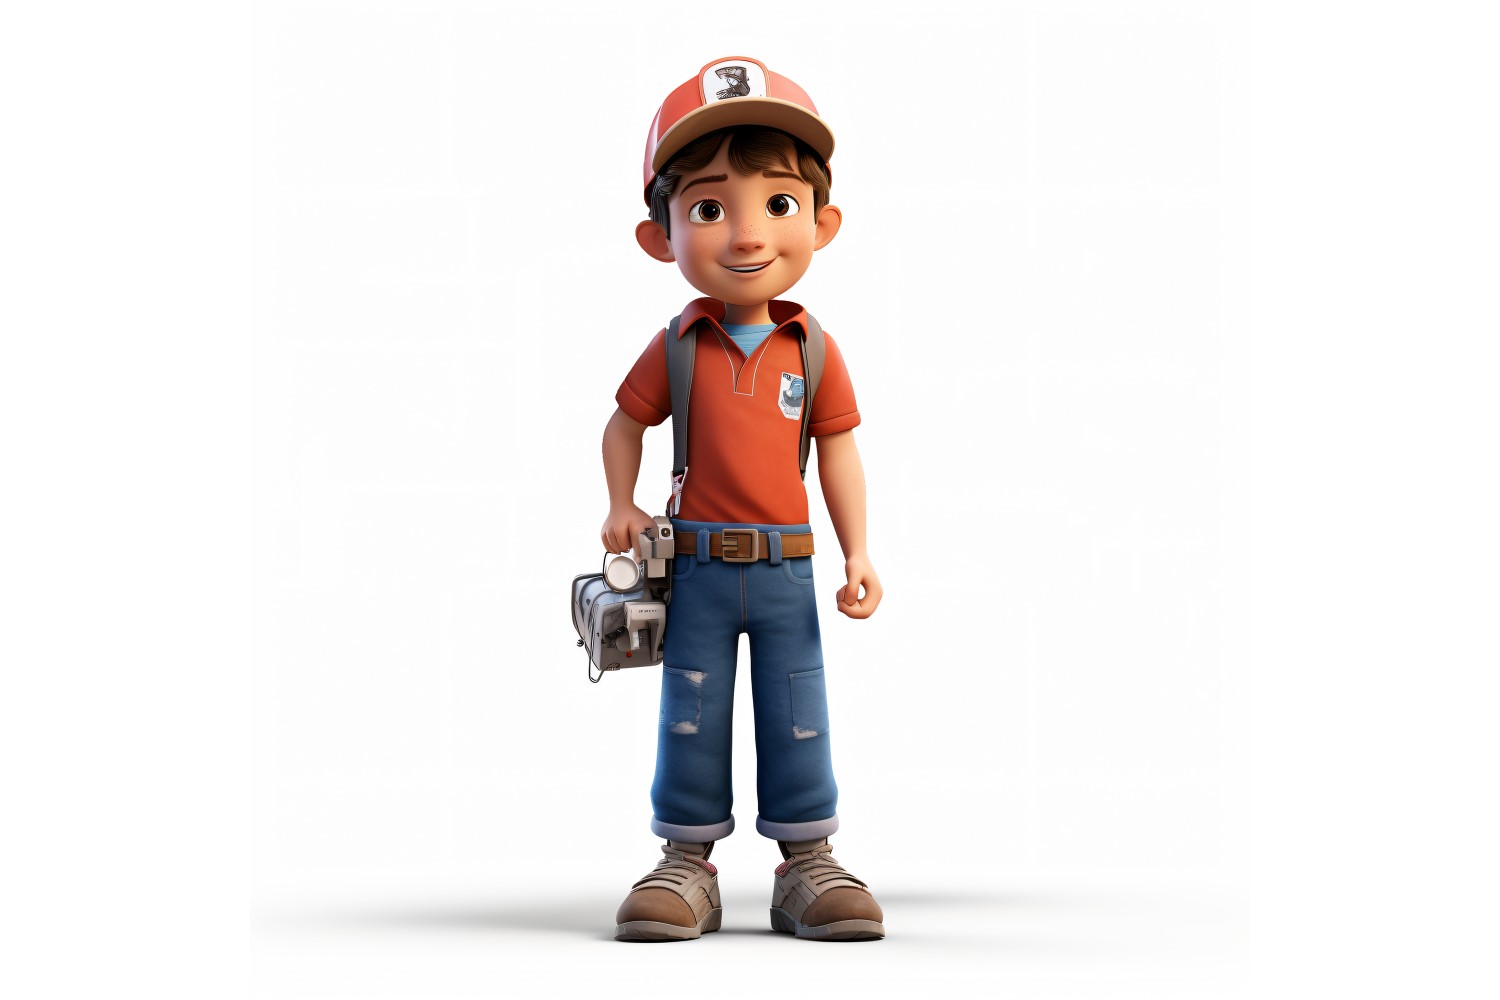 3D pixar Character Child Boy with relevant environment 66